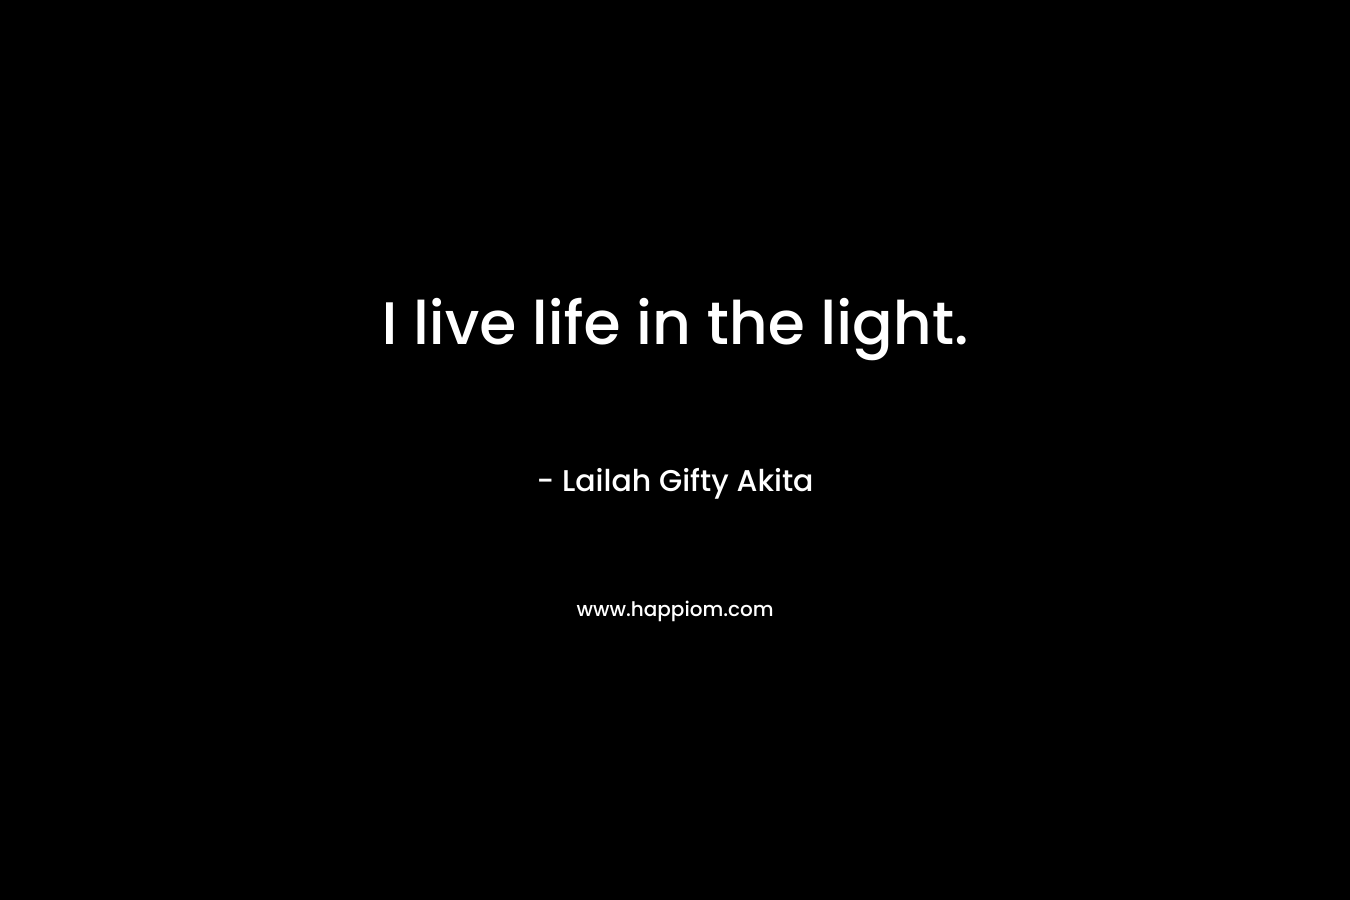 I live life in the light.